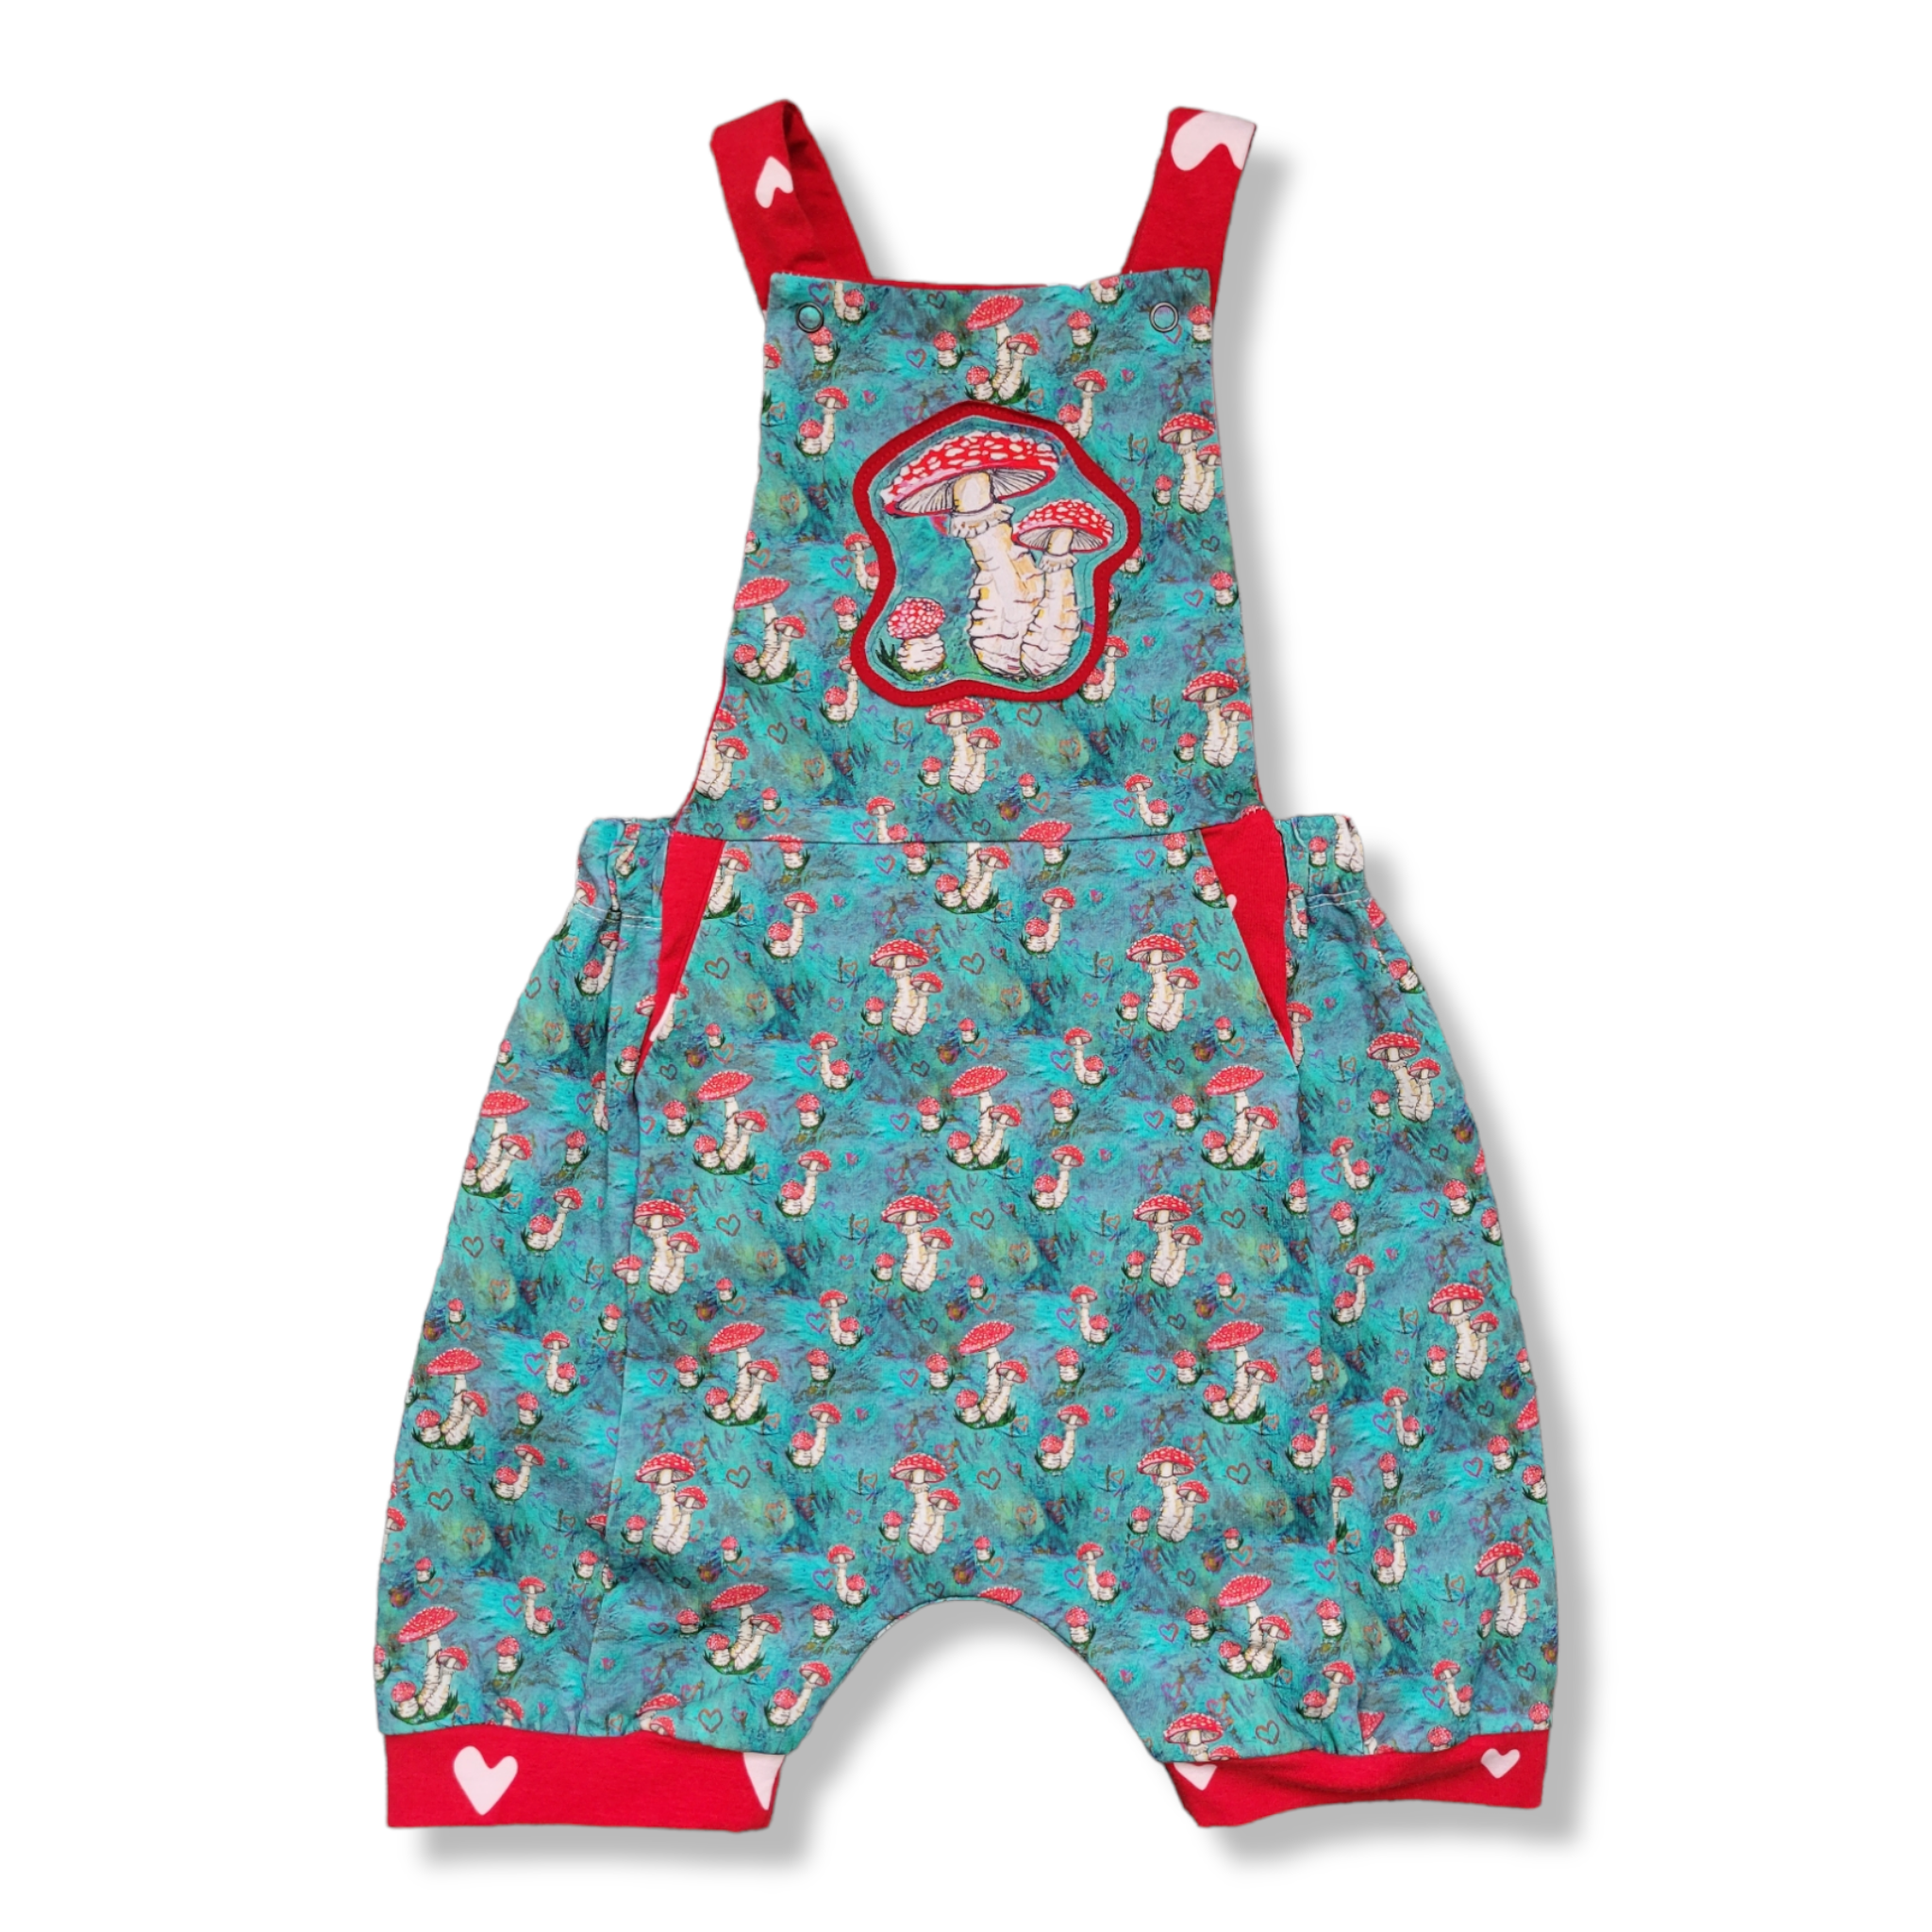 5T Mushroom with Red Hearts Romper with Applique